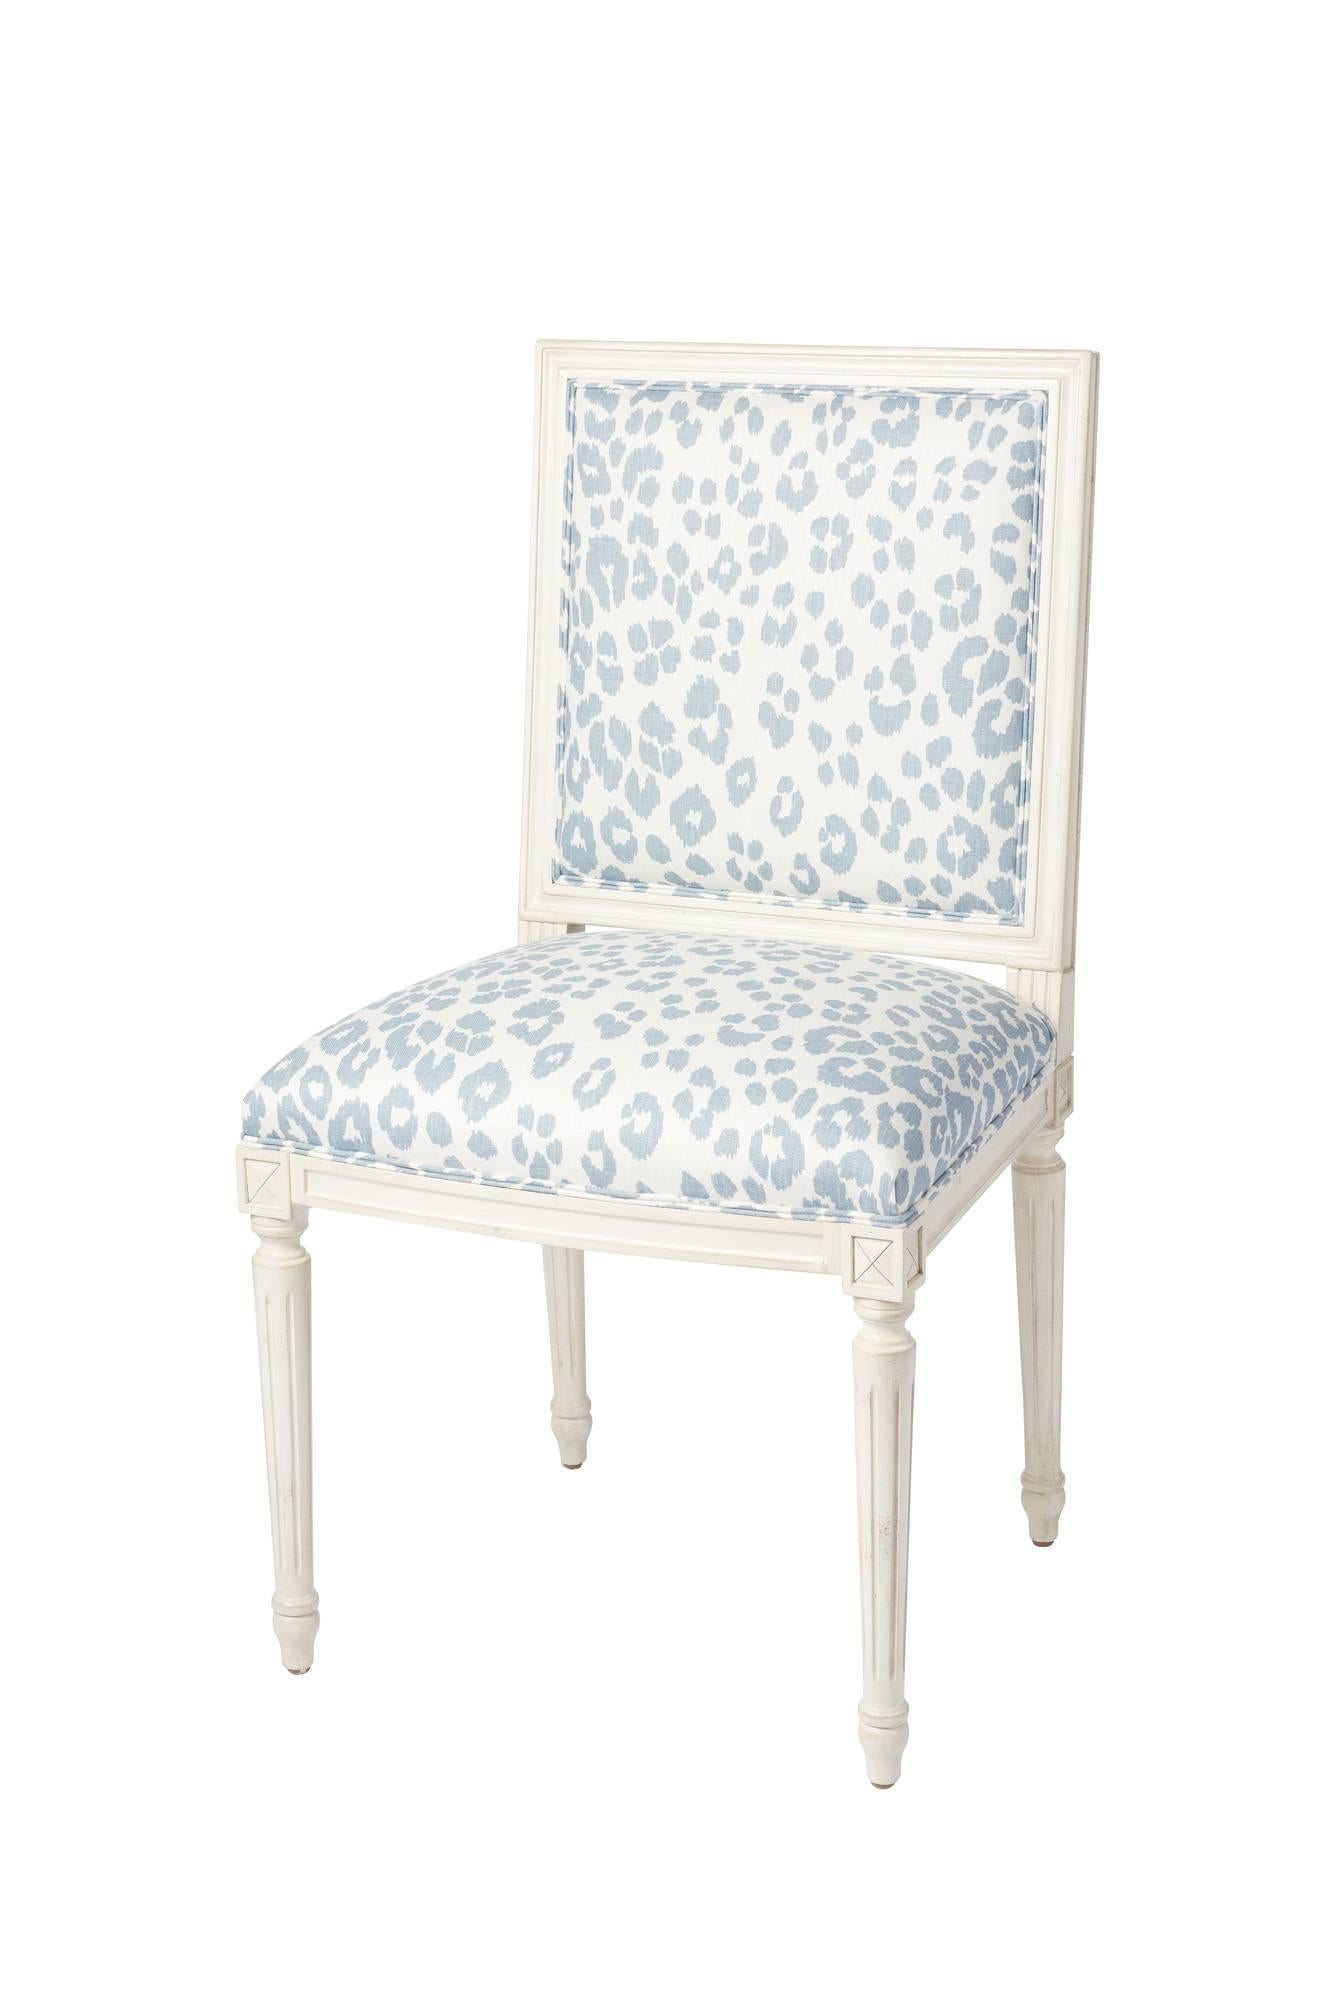 Schumacher Marie Therese Iconic Leopard Blue Hand-Carved Beechwood Side Chair  3